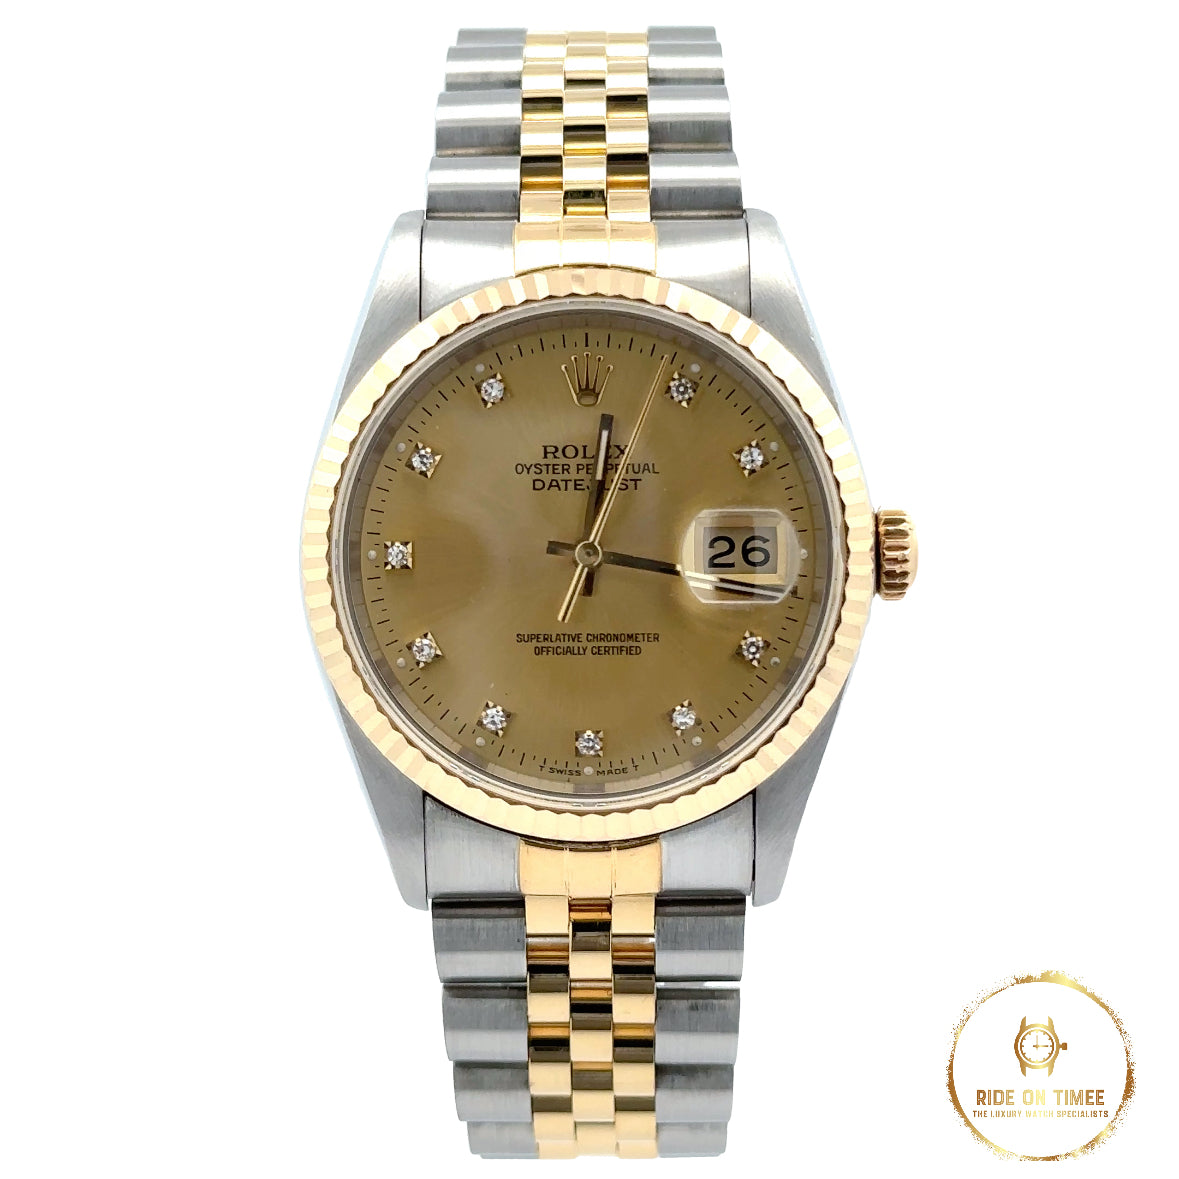 Rolex Datejust 36mm Factory Champagne Diamond Dial ‘16233’ - Ride On Timee